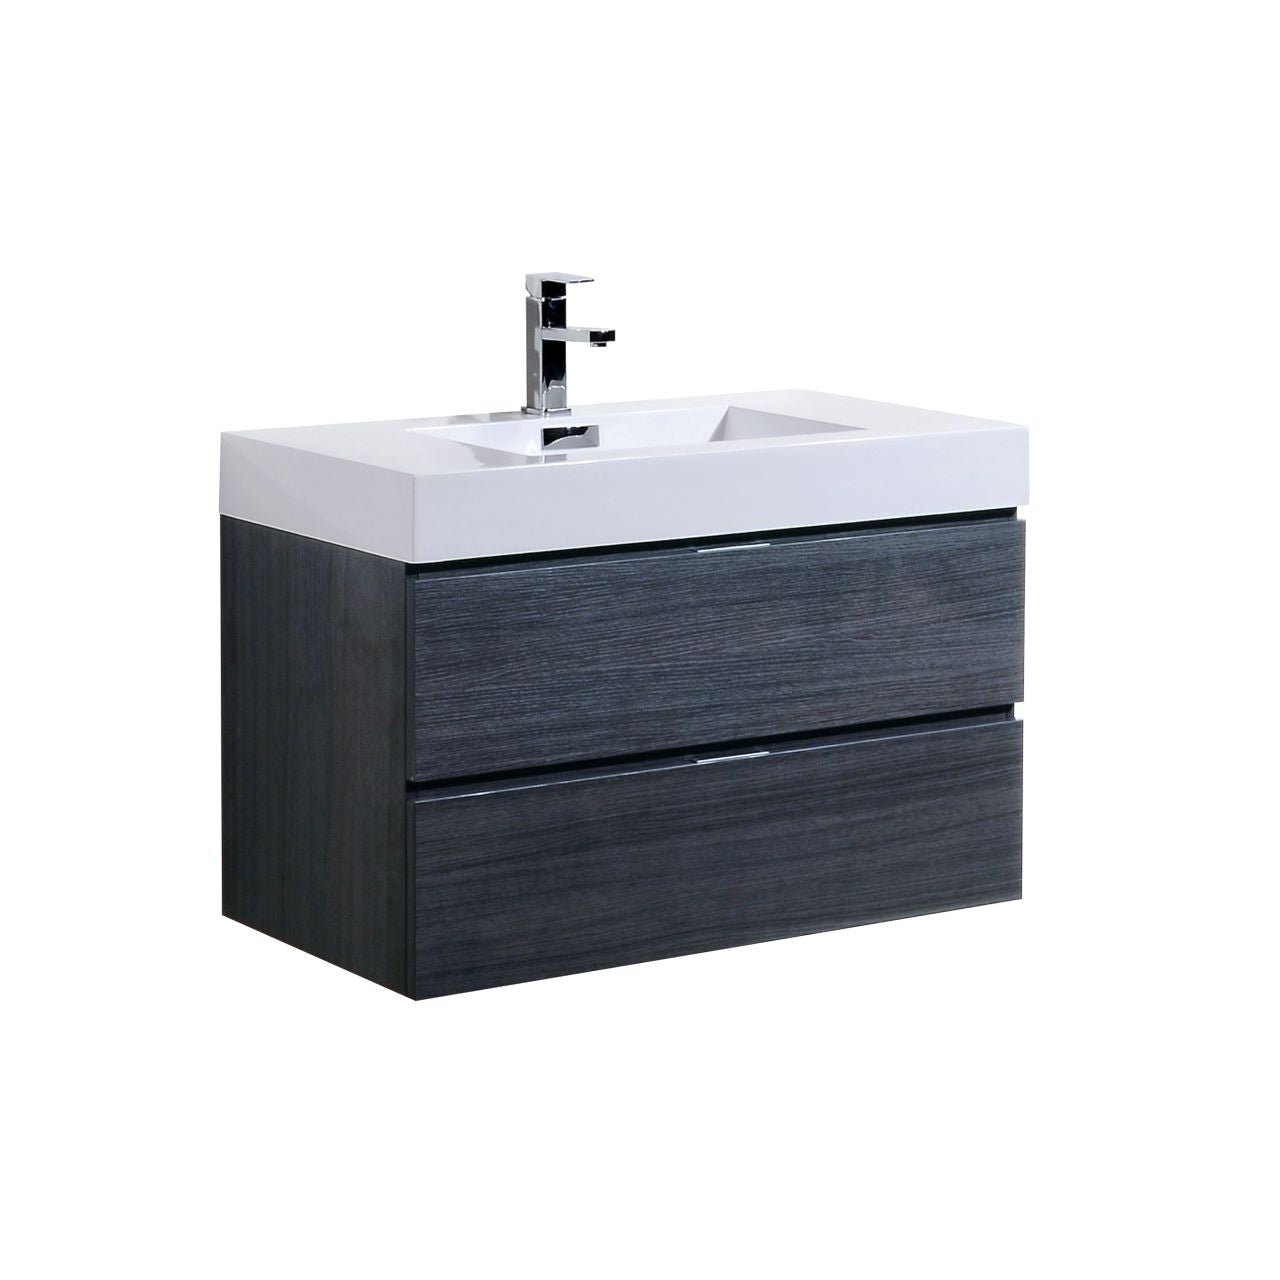 KUBEBATH Bliss BSL36-GO 36" Single Wall Mount Bathroom Vanity in Gray Oak with White Acrylic Composite, Integrated Sink, Angled View